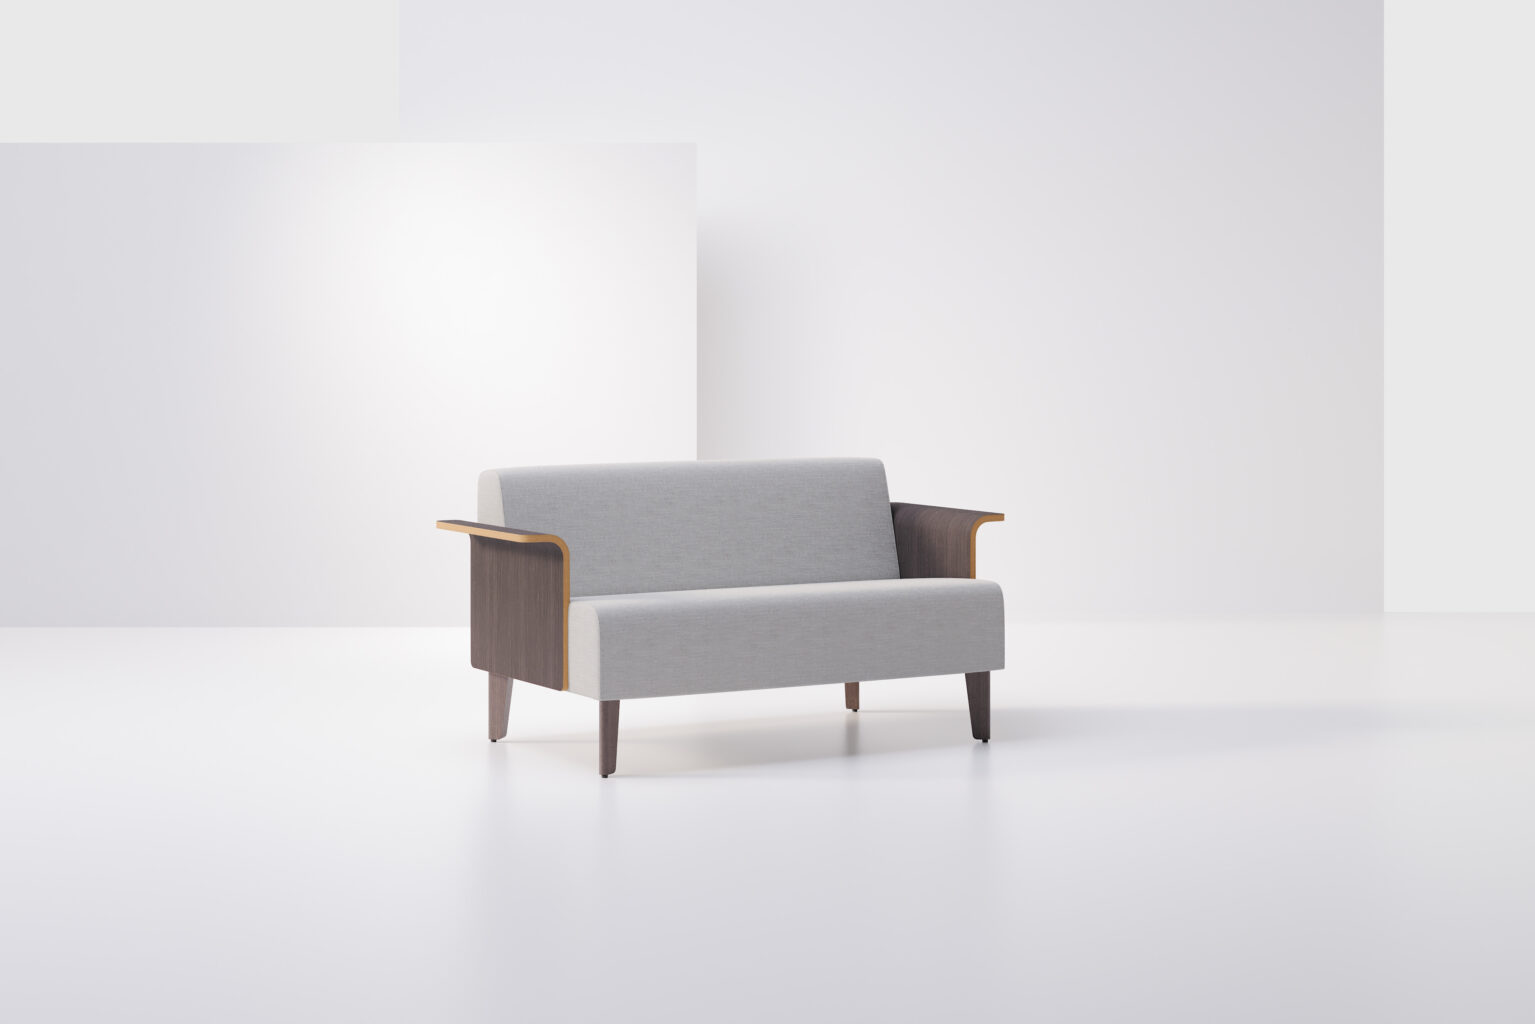 Avila Sofa with Molded Wood Arms Product Image 1